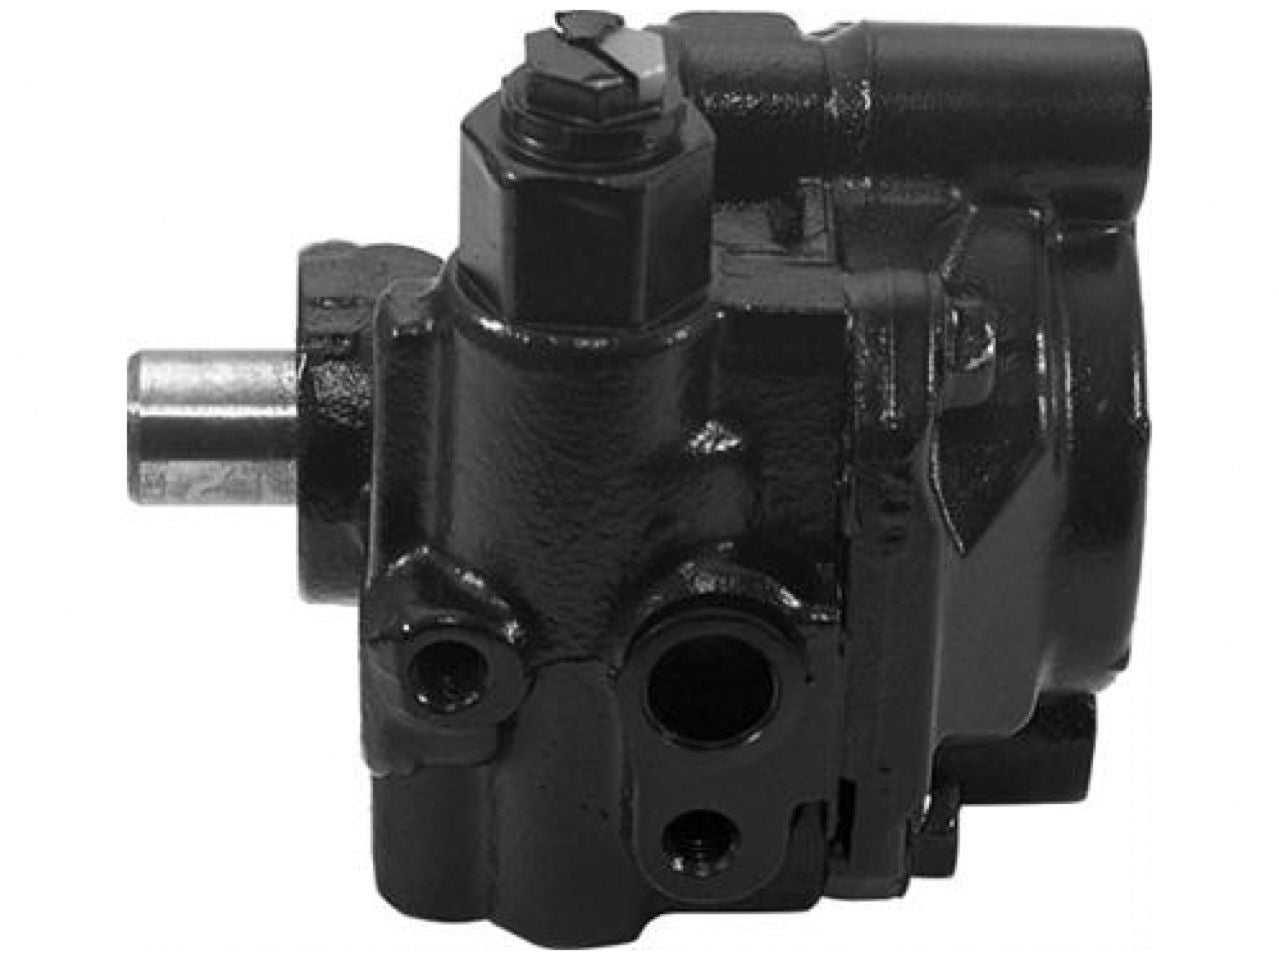 A1 Remfg Inc Power Steering Pumps 21-5926 Item Image